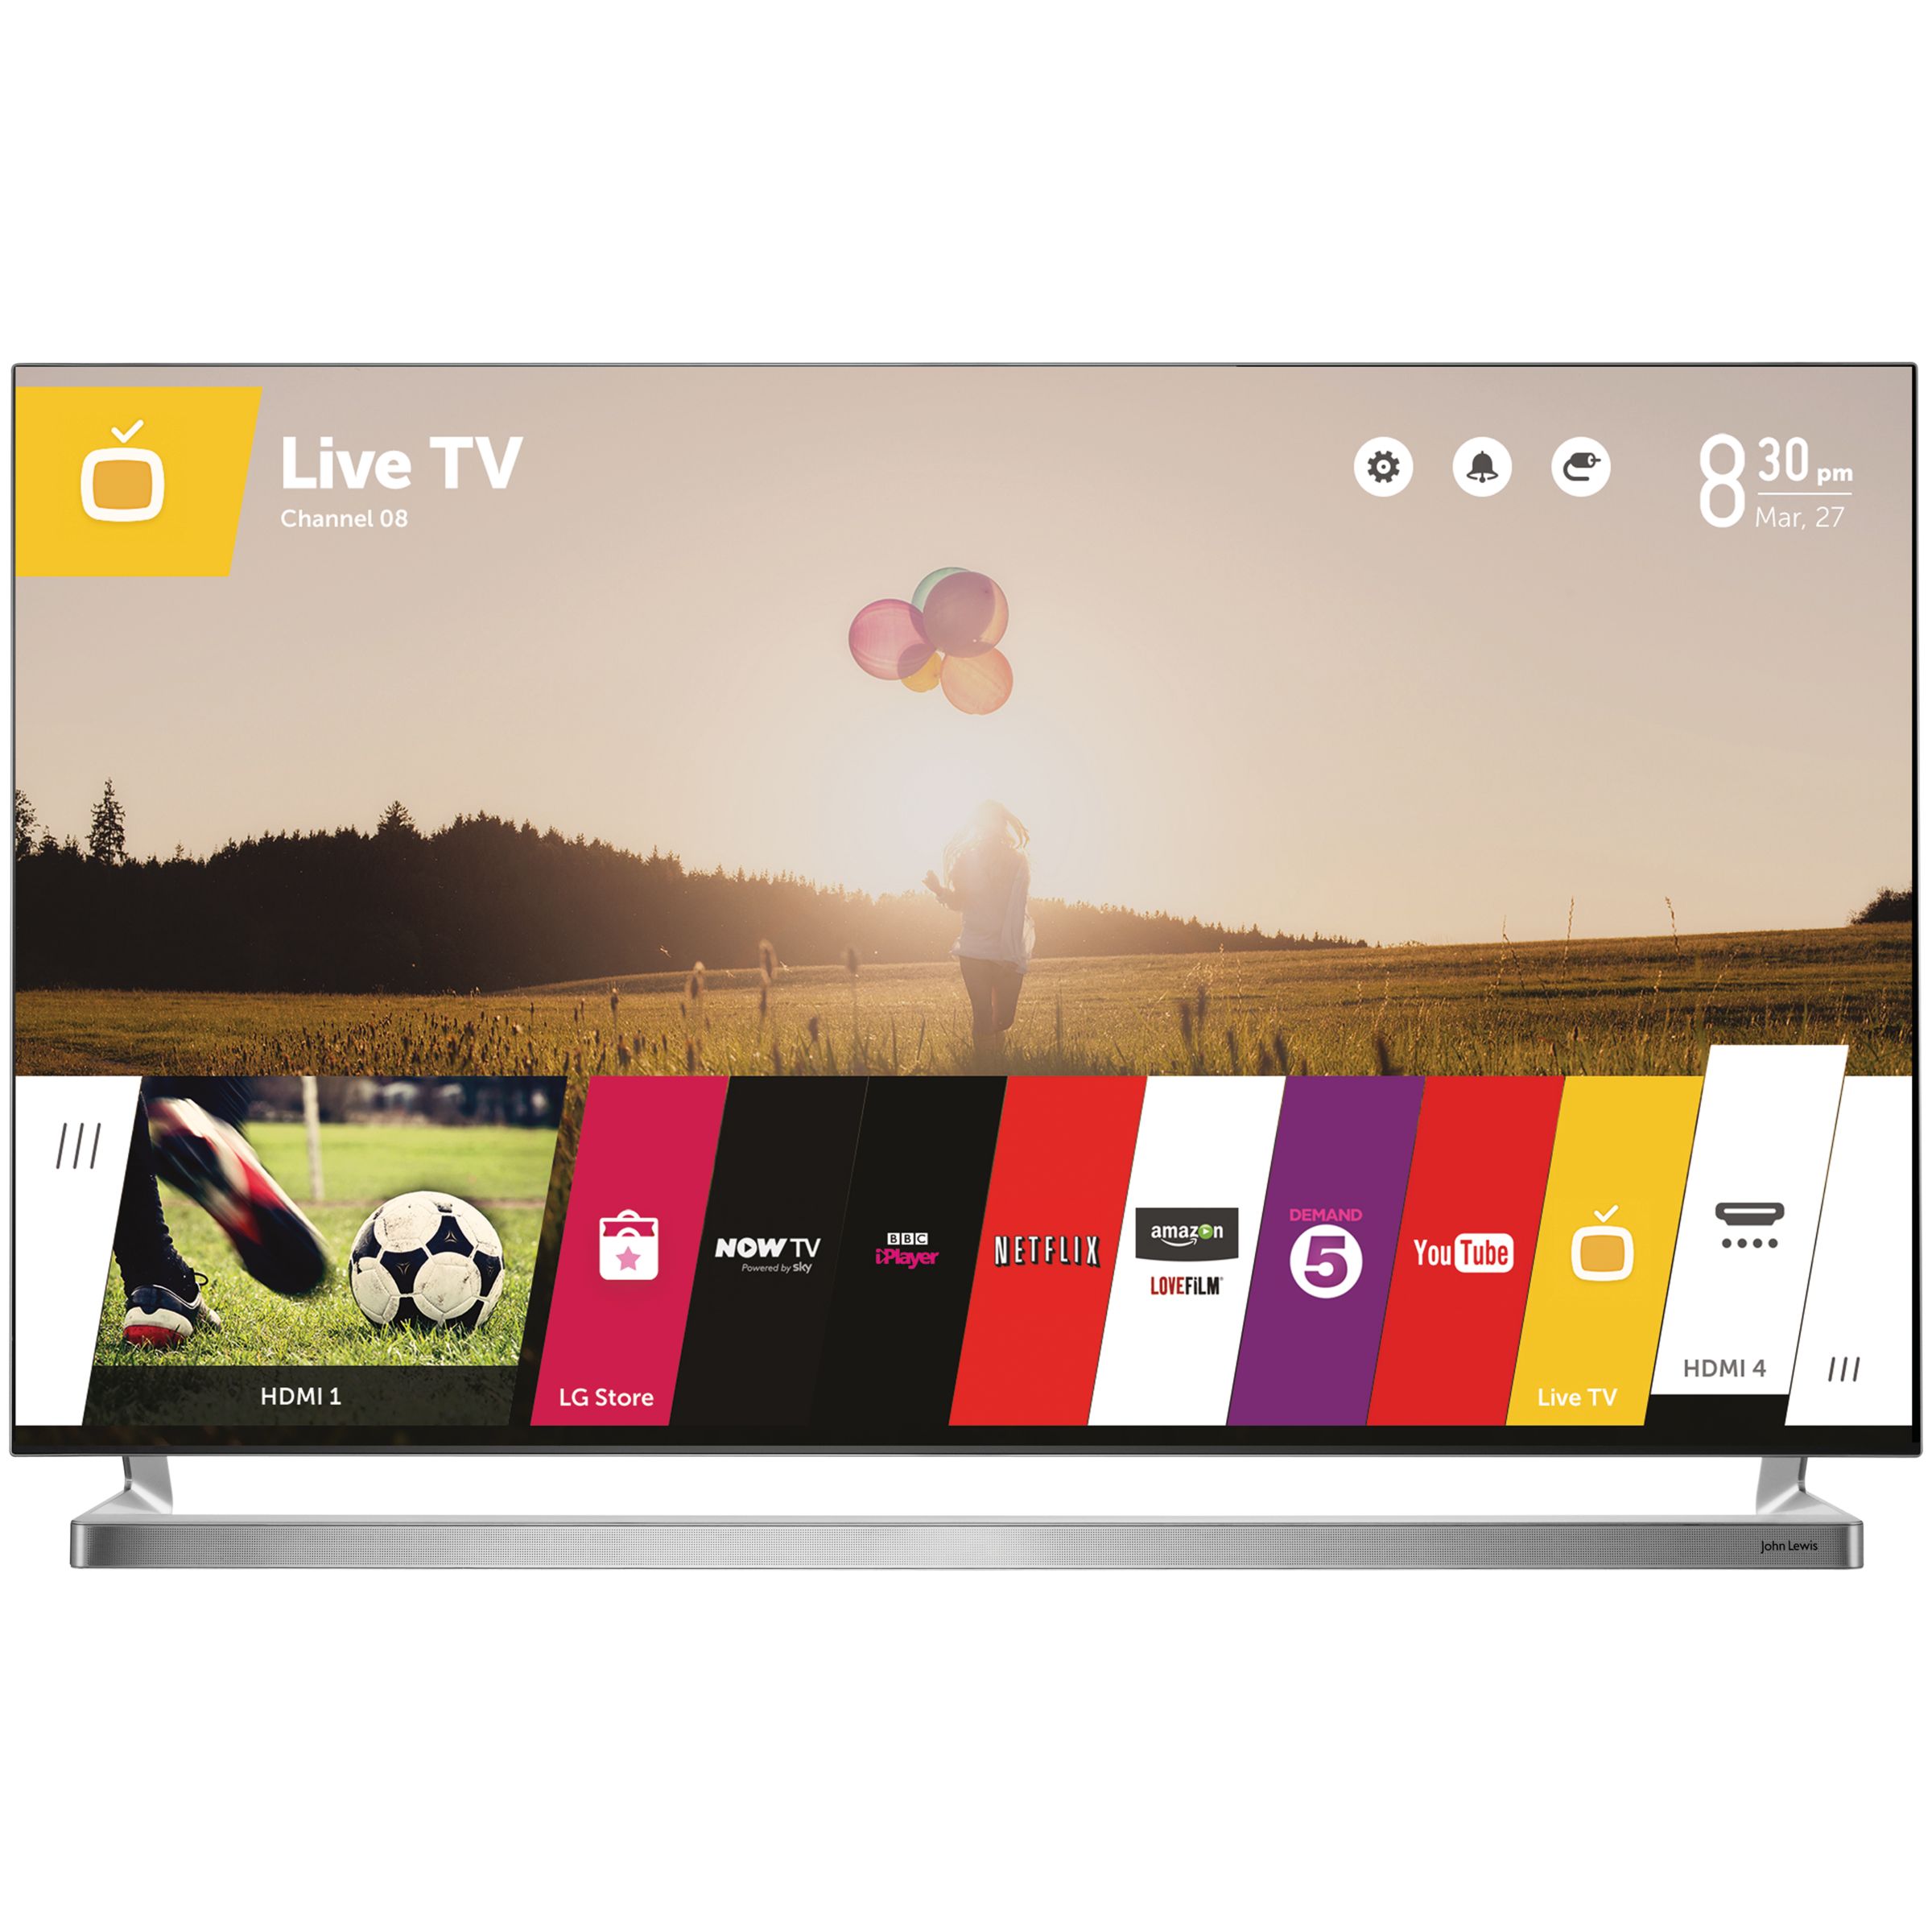 John Lewis 49JL9000 LED HD 1080p 3D Smart TV, 49" with Freeview HD & 2x 3D Glasses